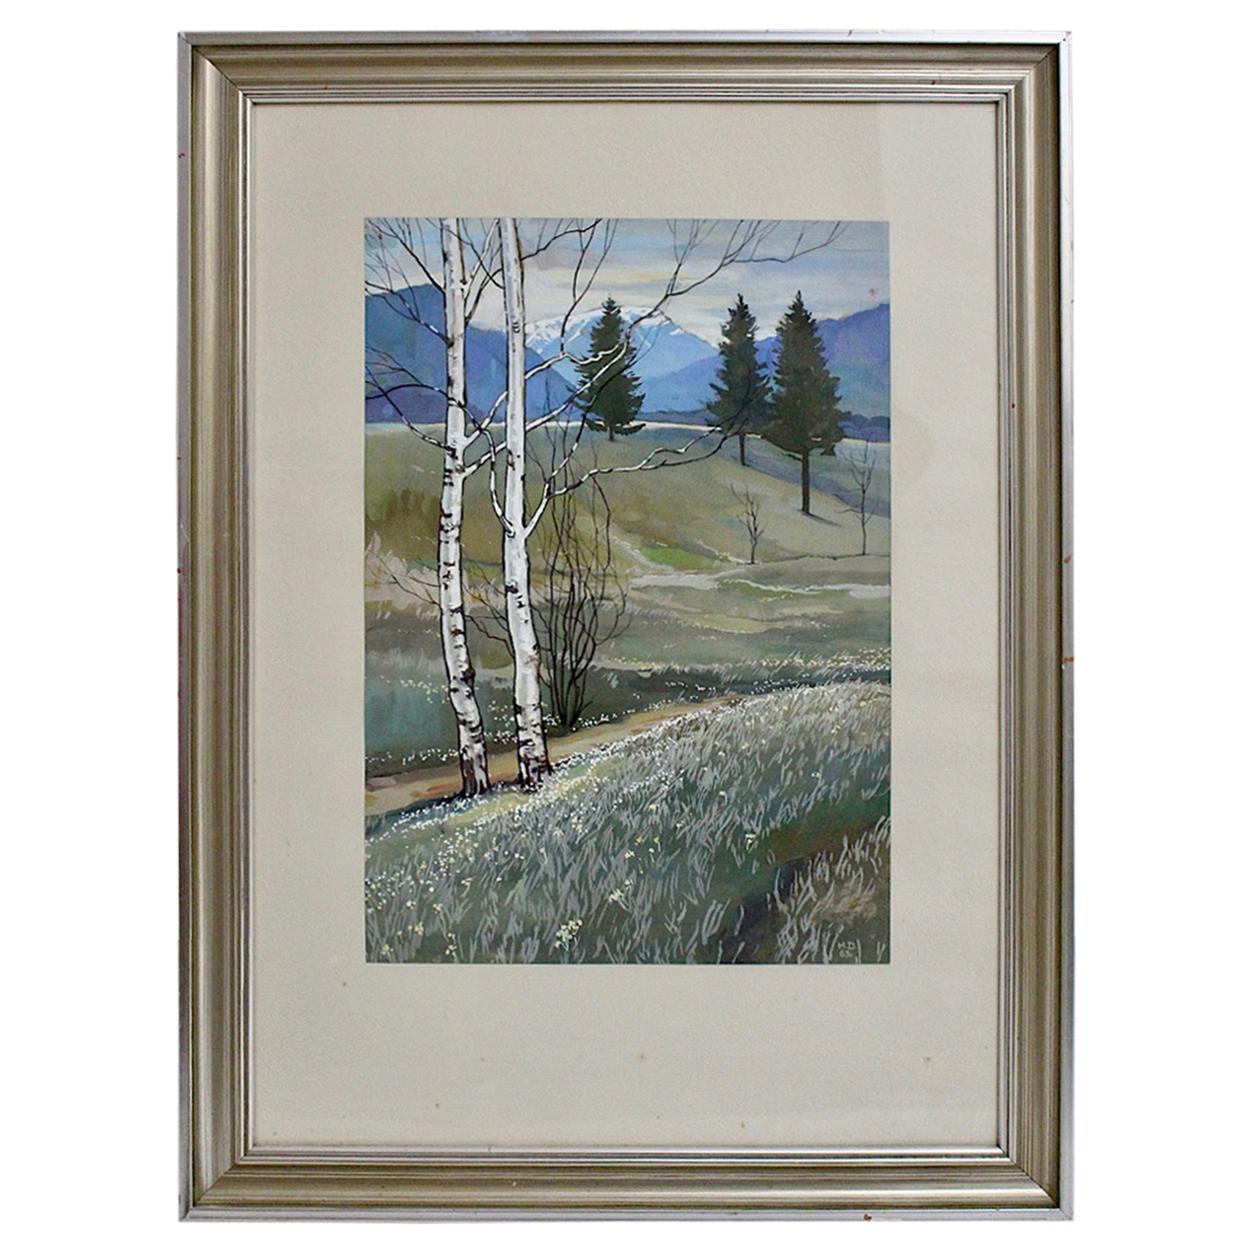 Mid-Century Modern Vintage Landscape Watercolor Painting Max Daettl Vienna, 1963 For Sale